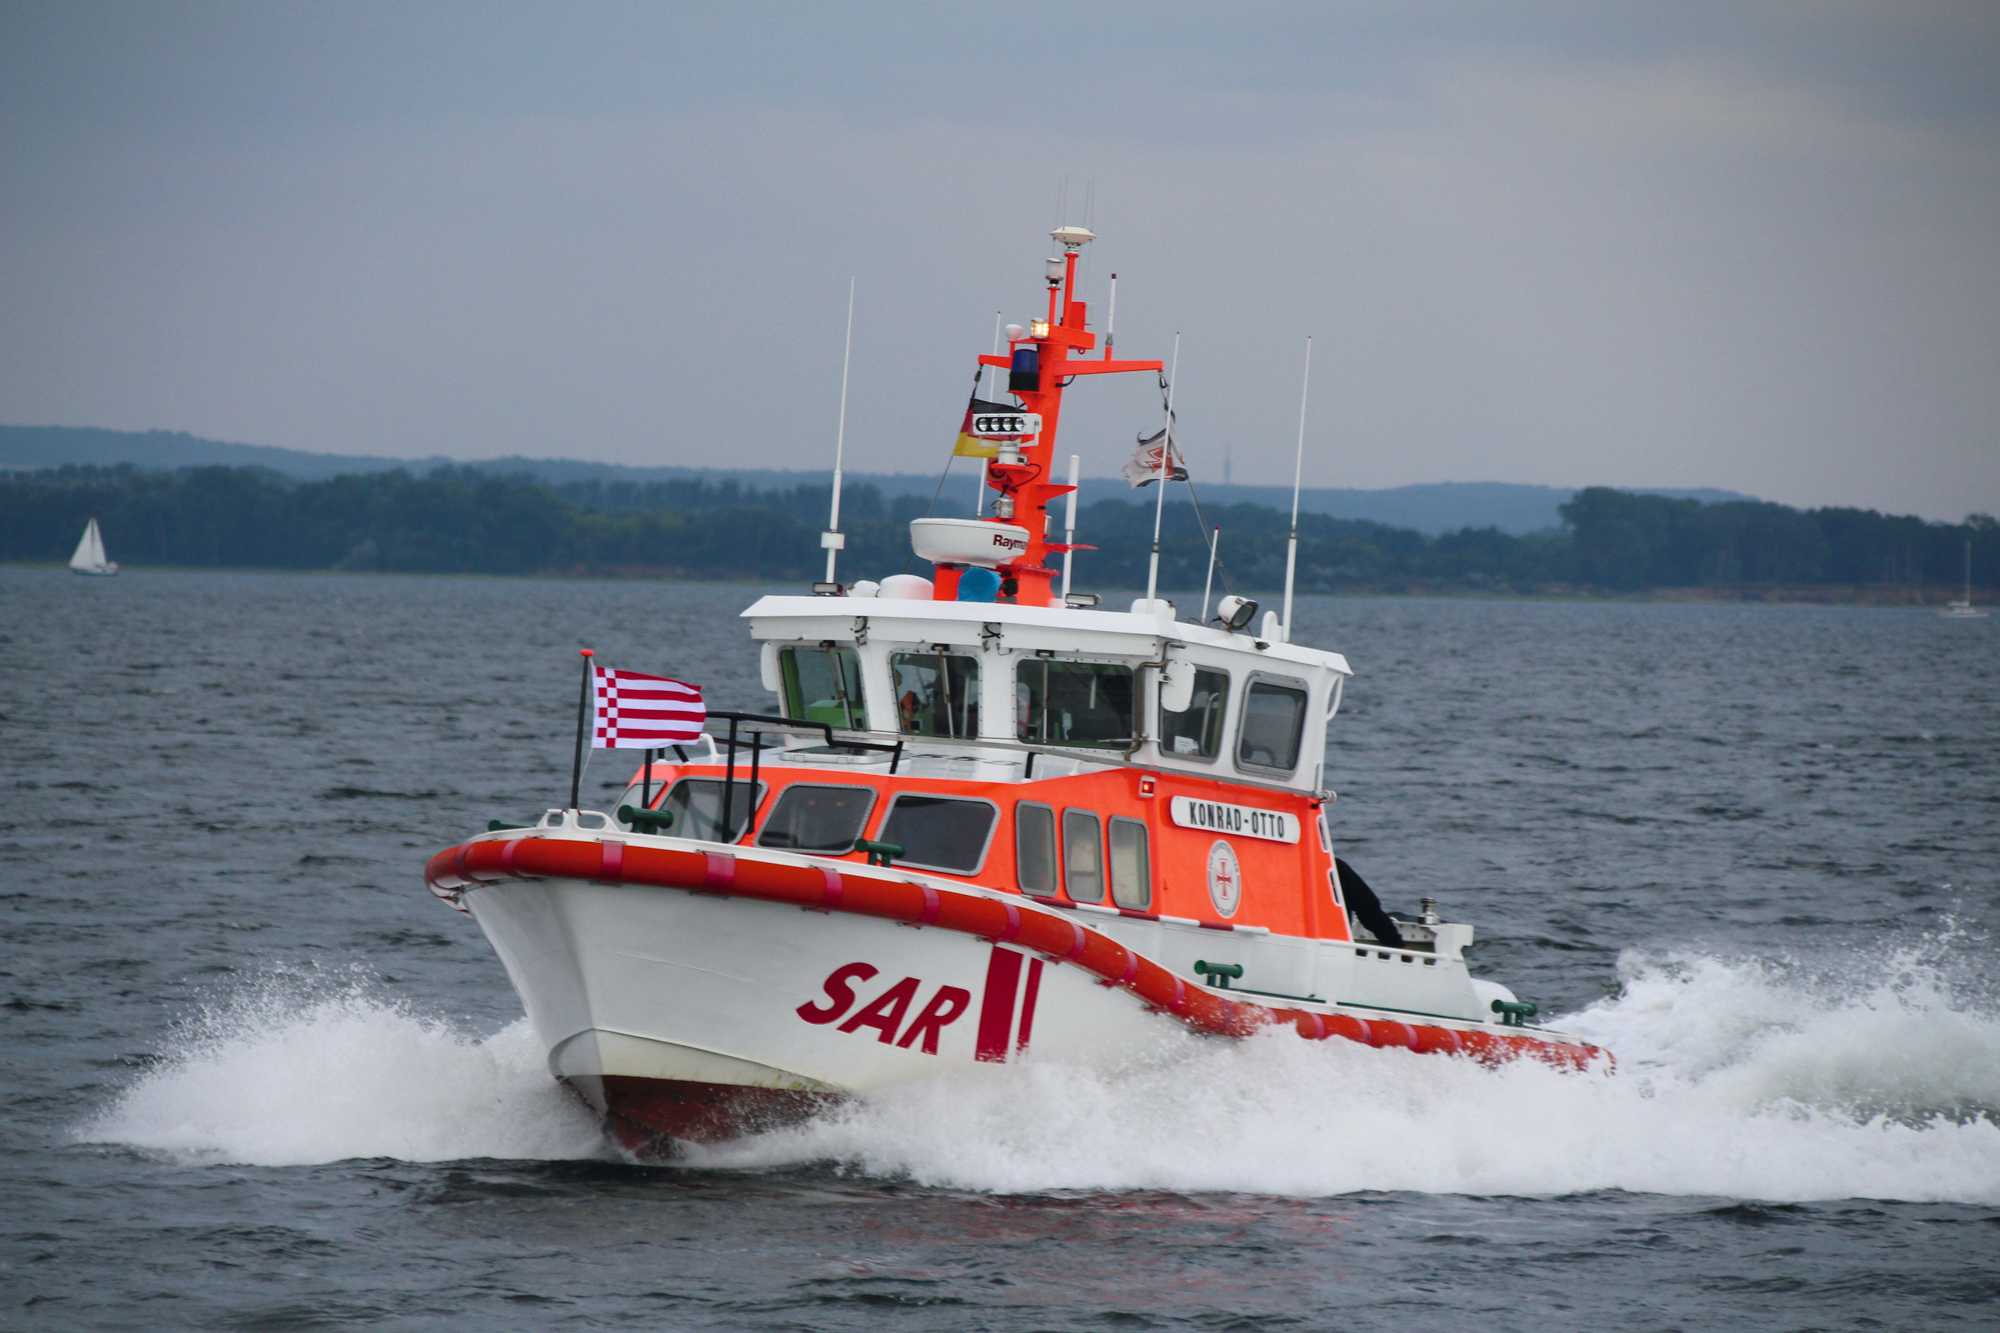 Report: DGzRS lifeboats - battling the fog and the tide | BOOTE